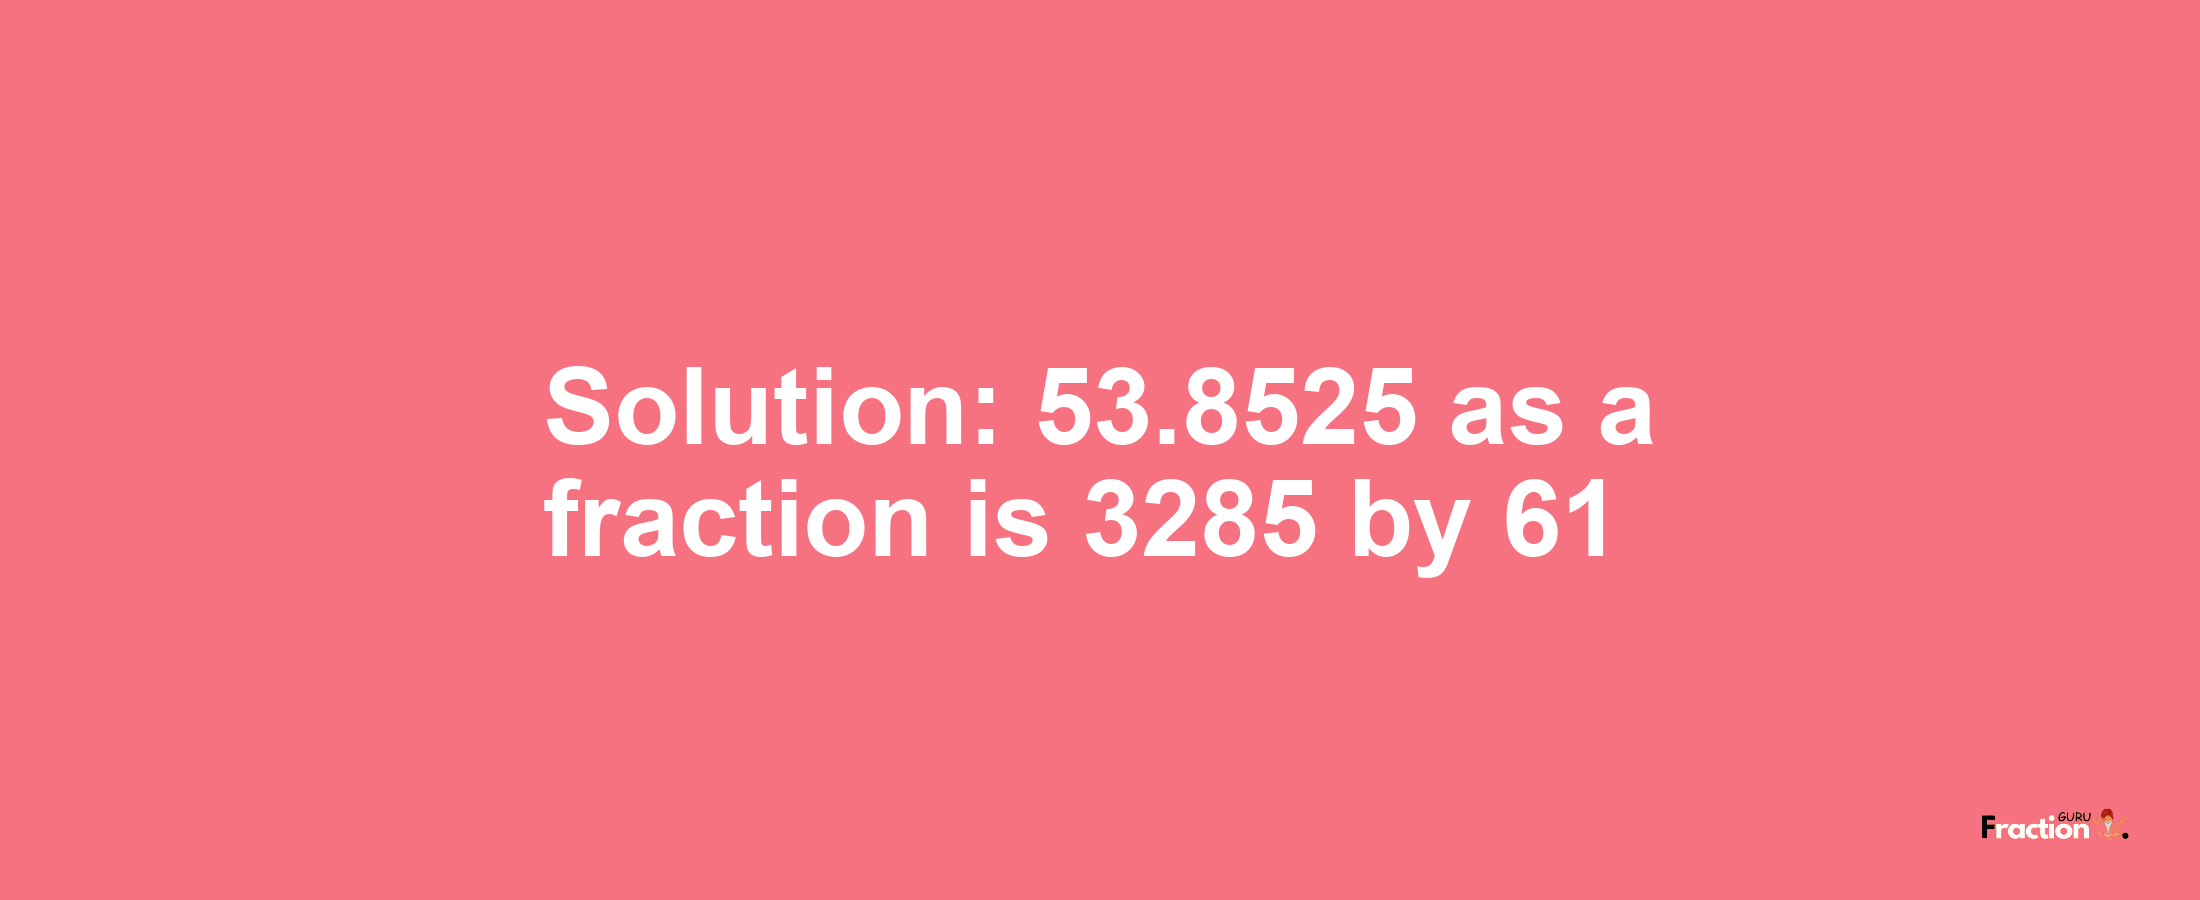 Solution:53.8525 as a fraction is 3285/61